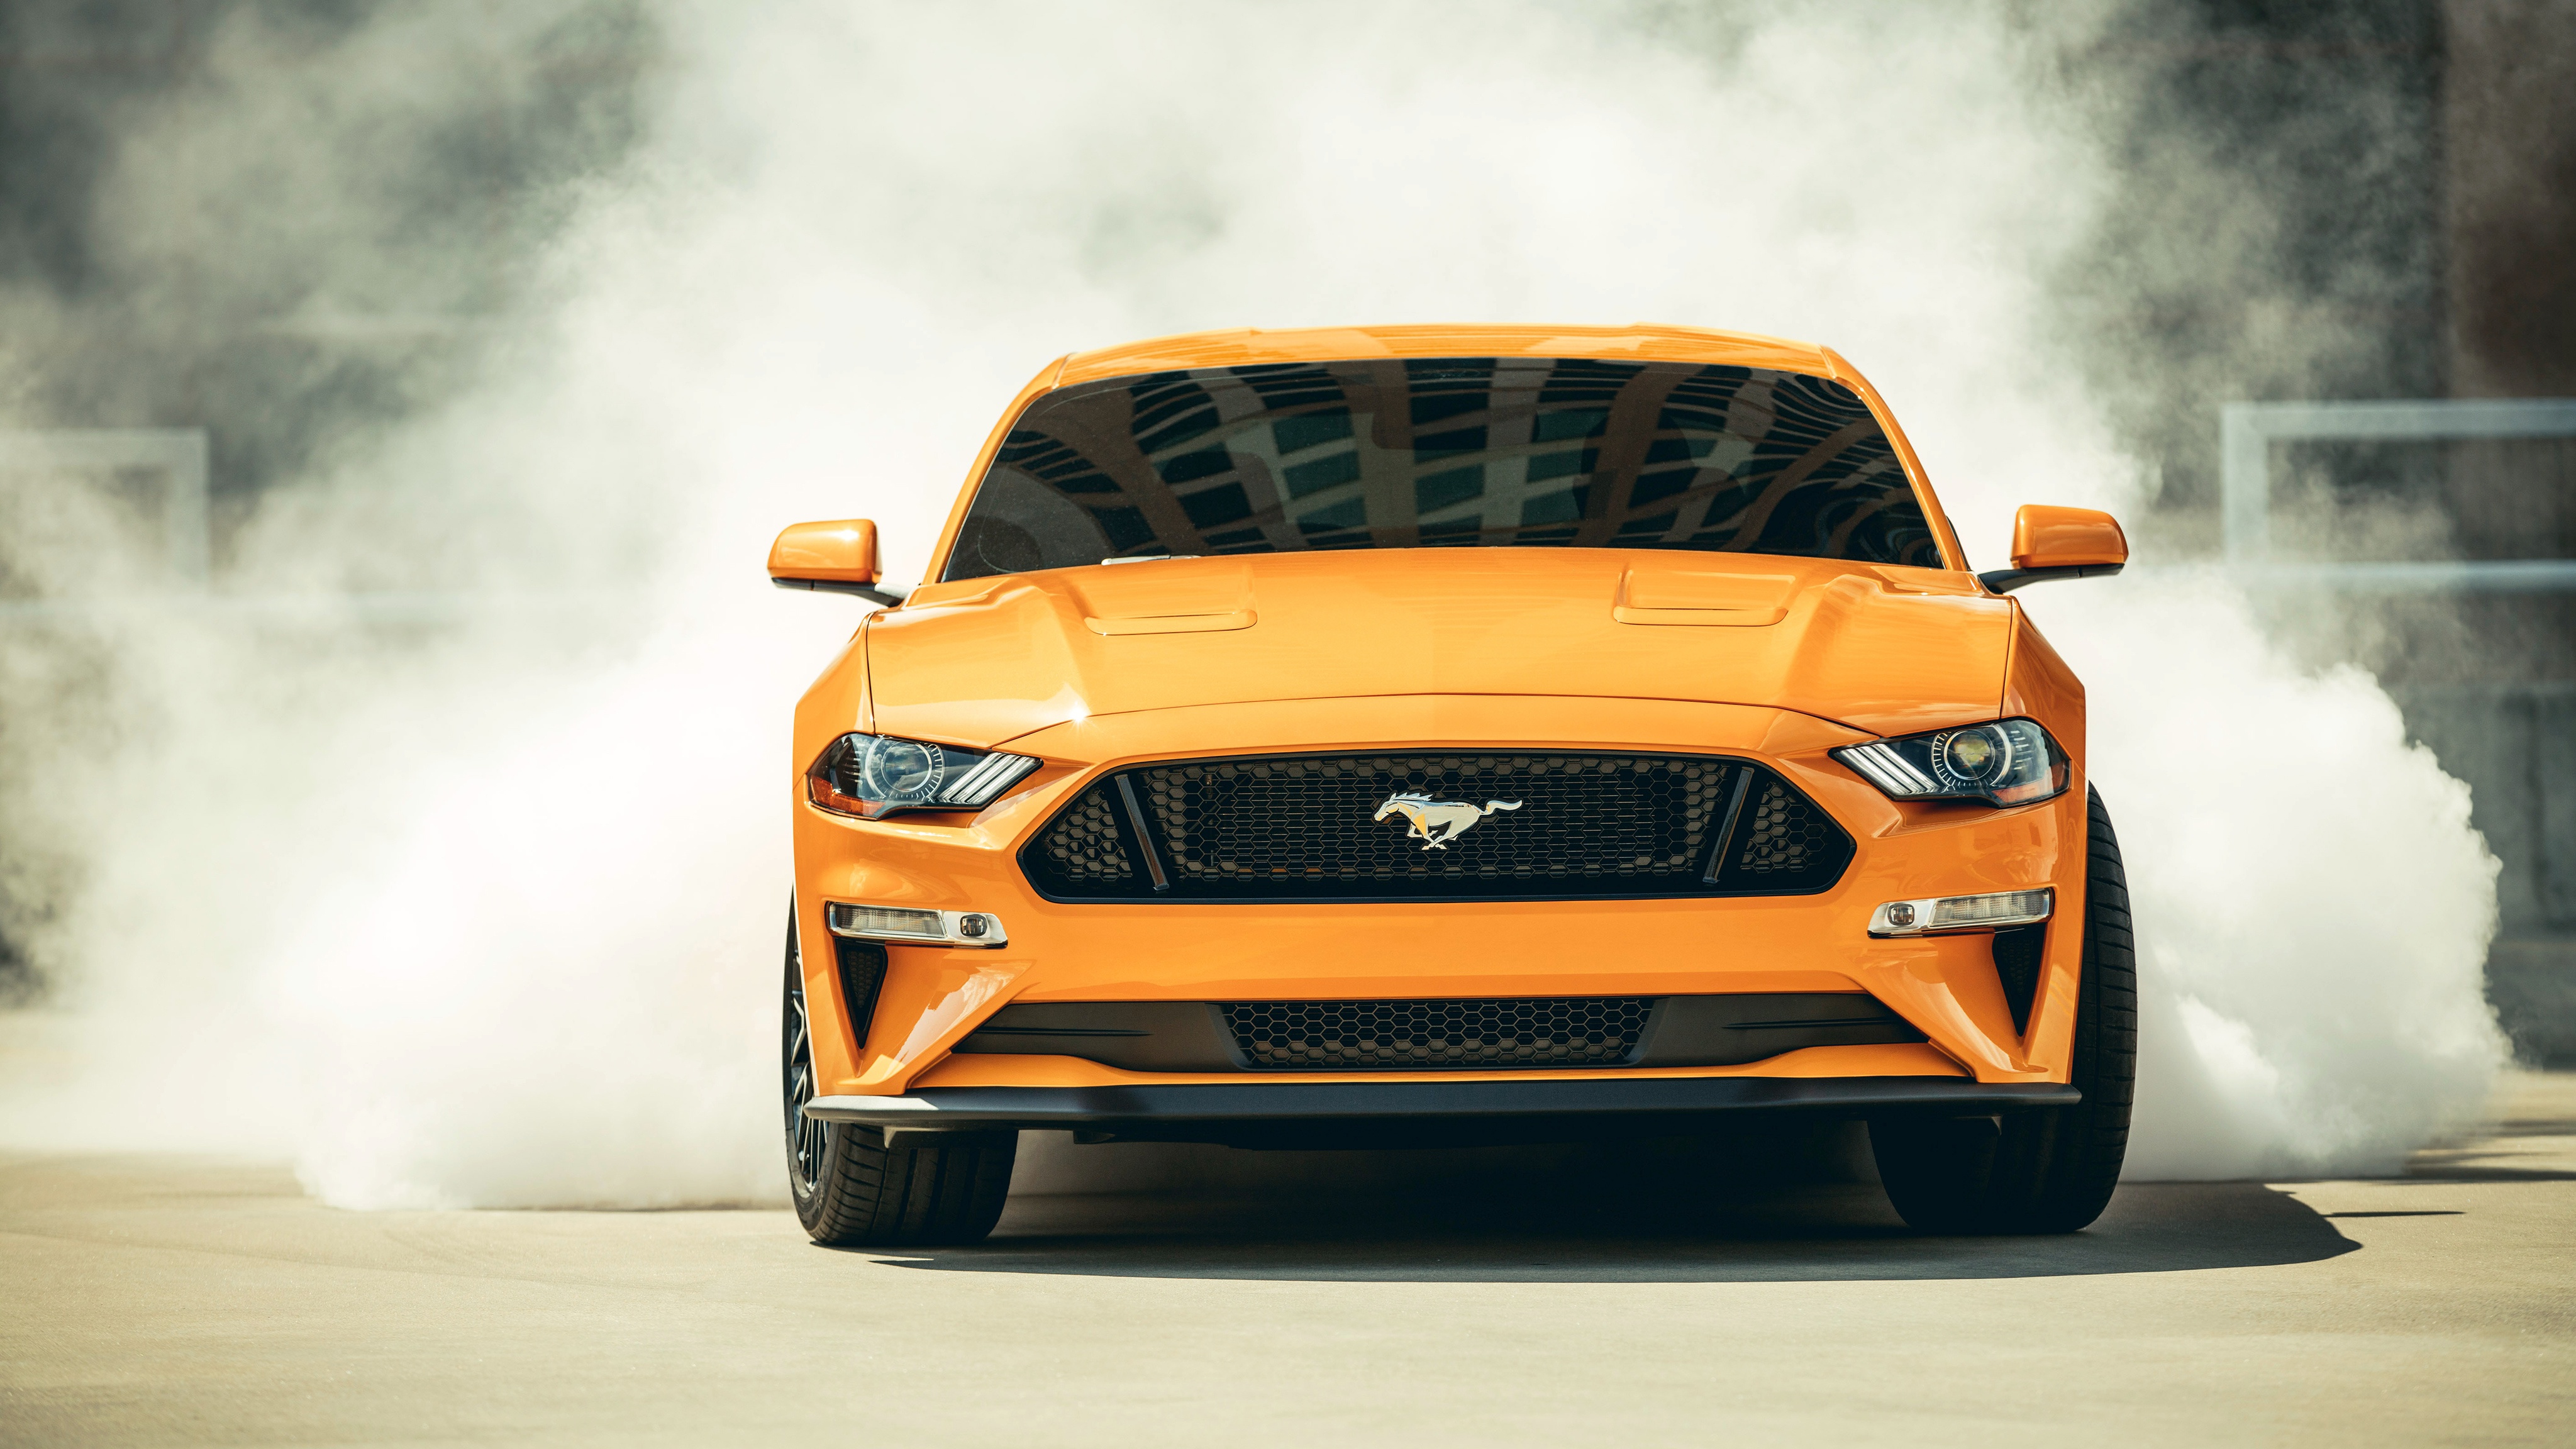 Burnout Car Ford Ford Mustang Ford Mustang Gt Muscle Car Orange Car Smoke Vehicle 4096x2304